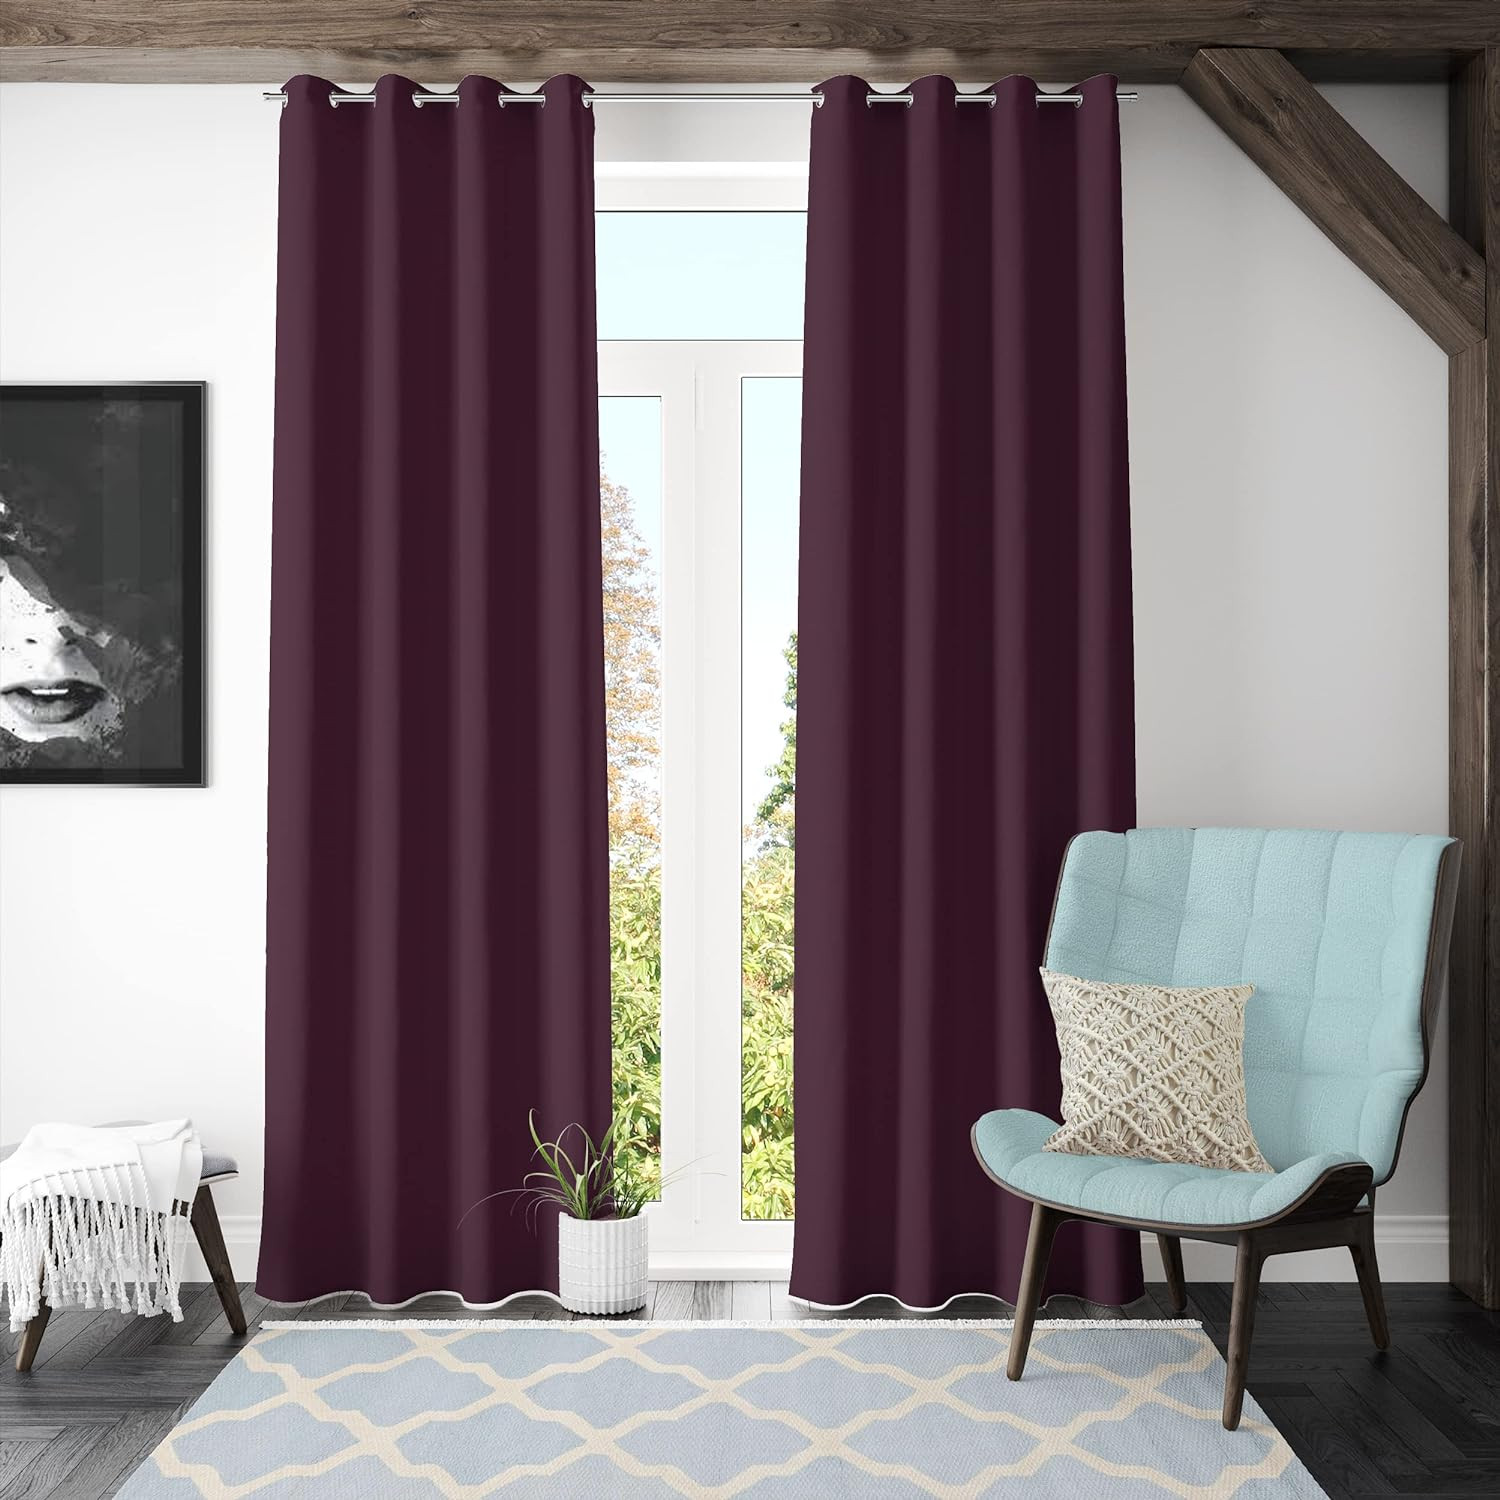 Kuber Industries 100% Room Darkening Black Out Curtain I 7 Feet Door Curtain I Insulated Heavy Polyester Solid Curtain|Drapes with 8 Eyelet for Home & Office (Wine)